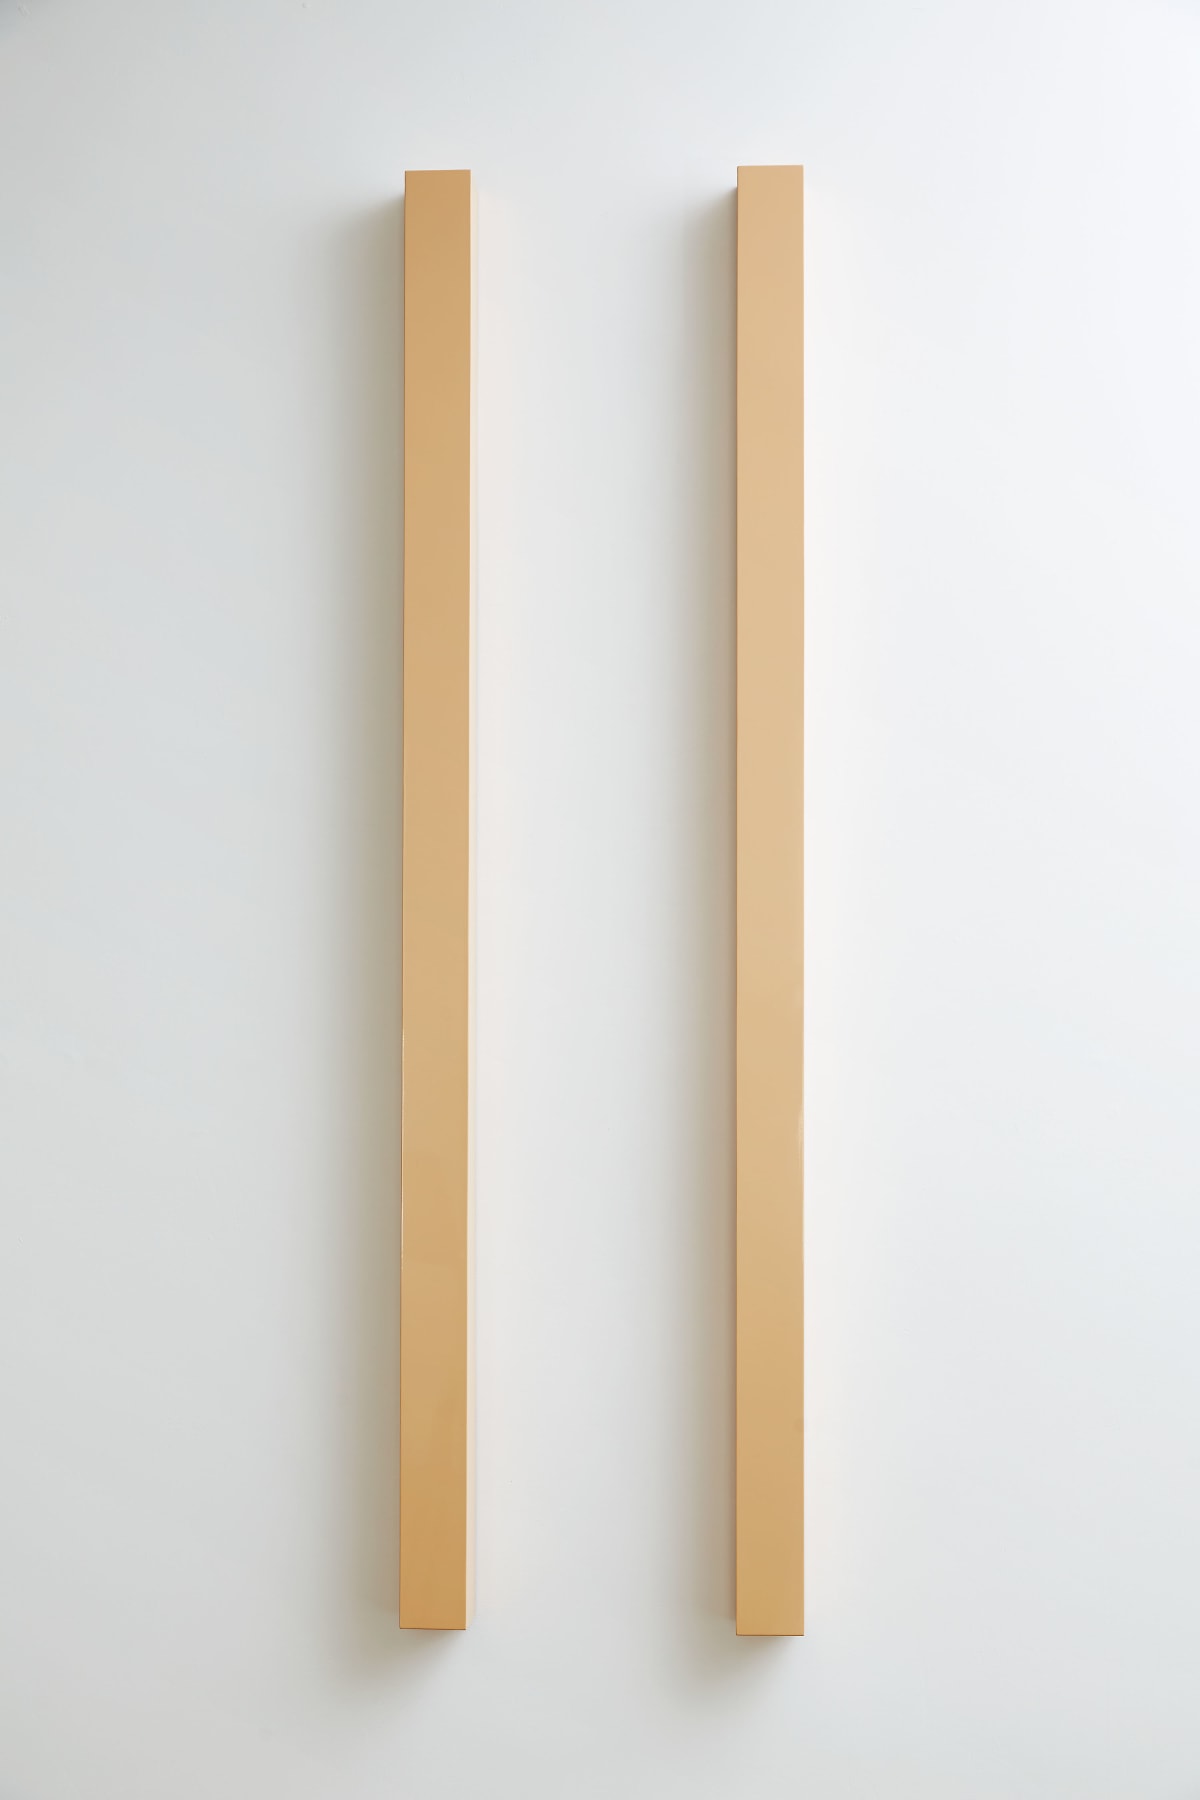 &quot;YELLOW-PINK TWO PARALLEL POLES&quot;, 1966